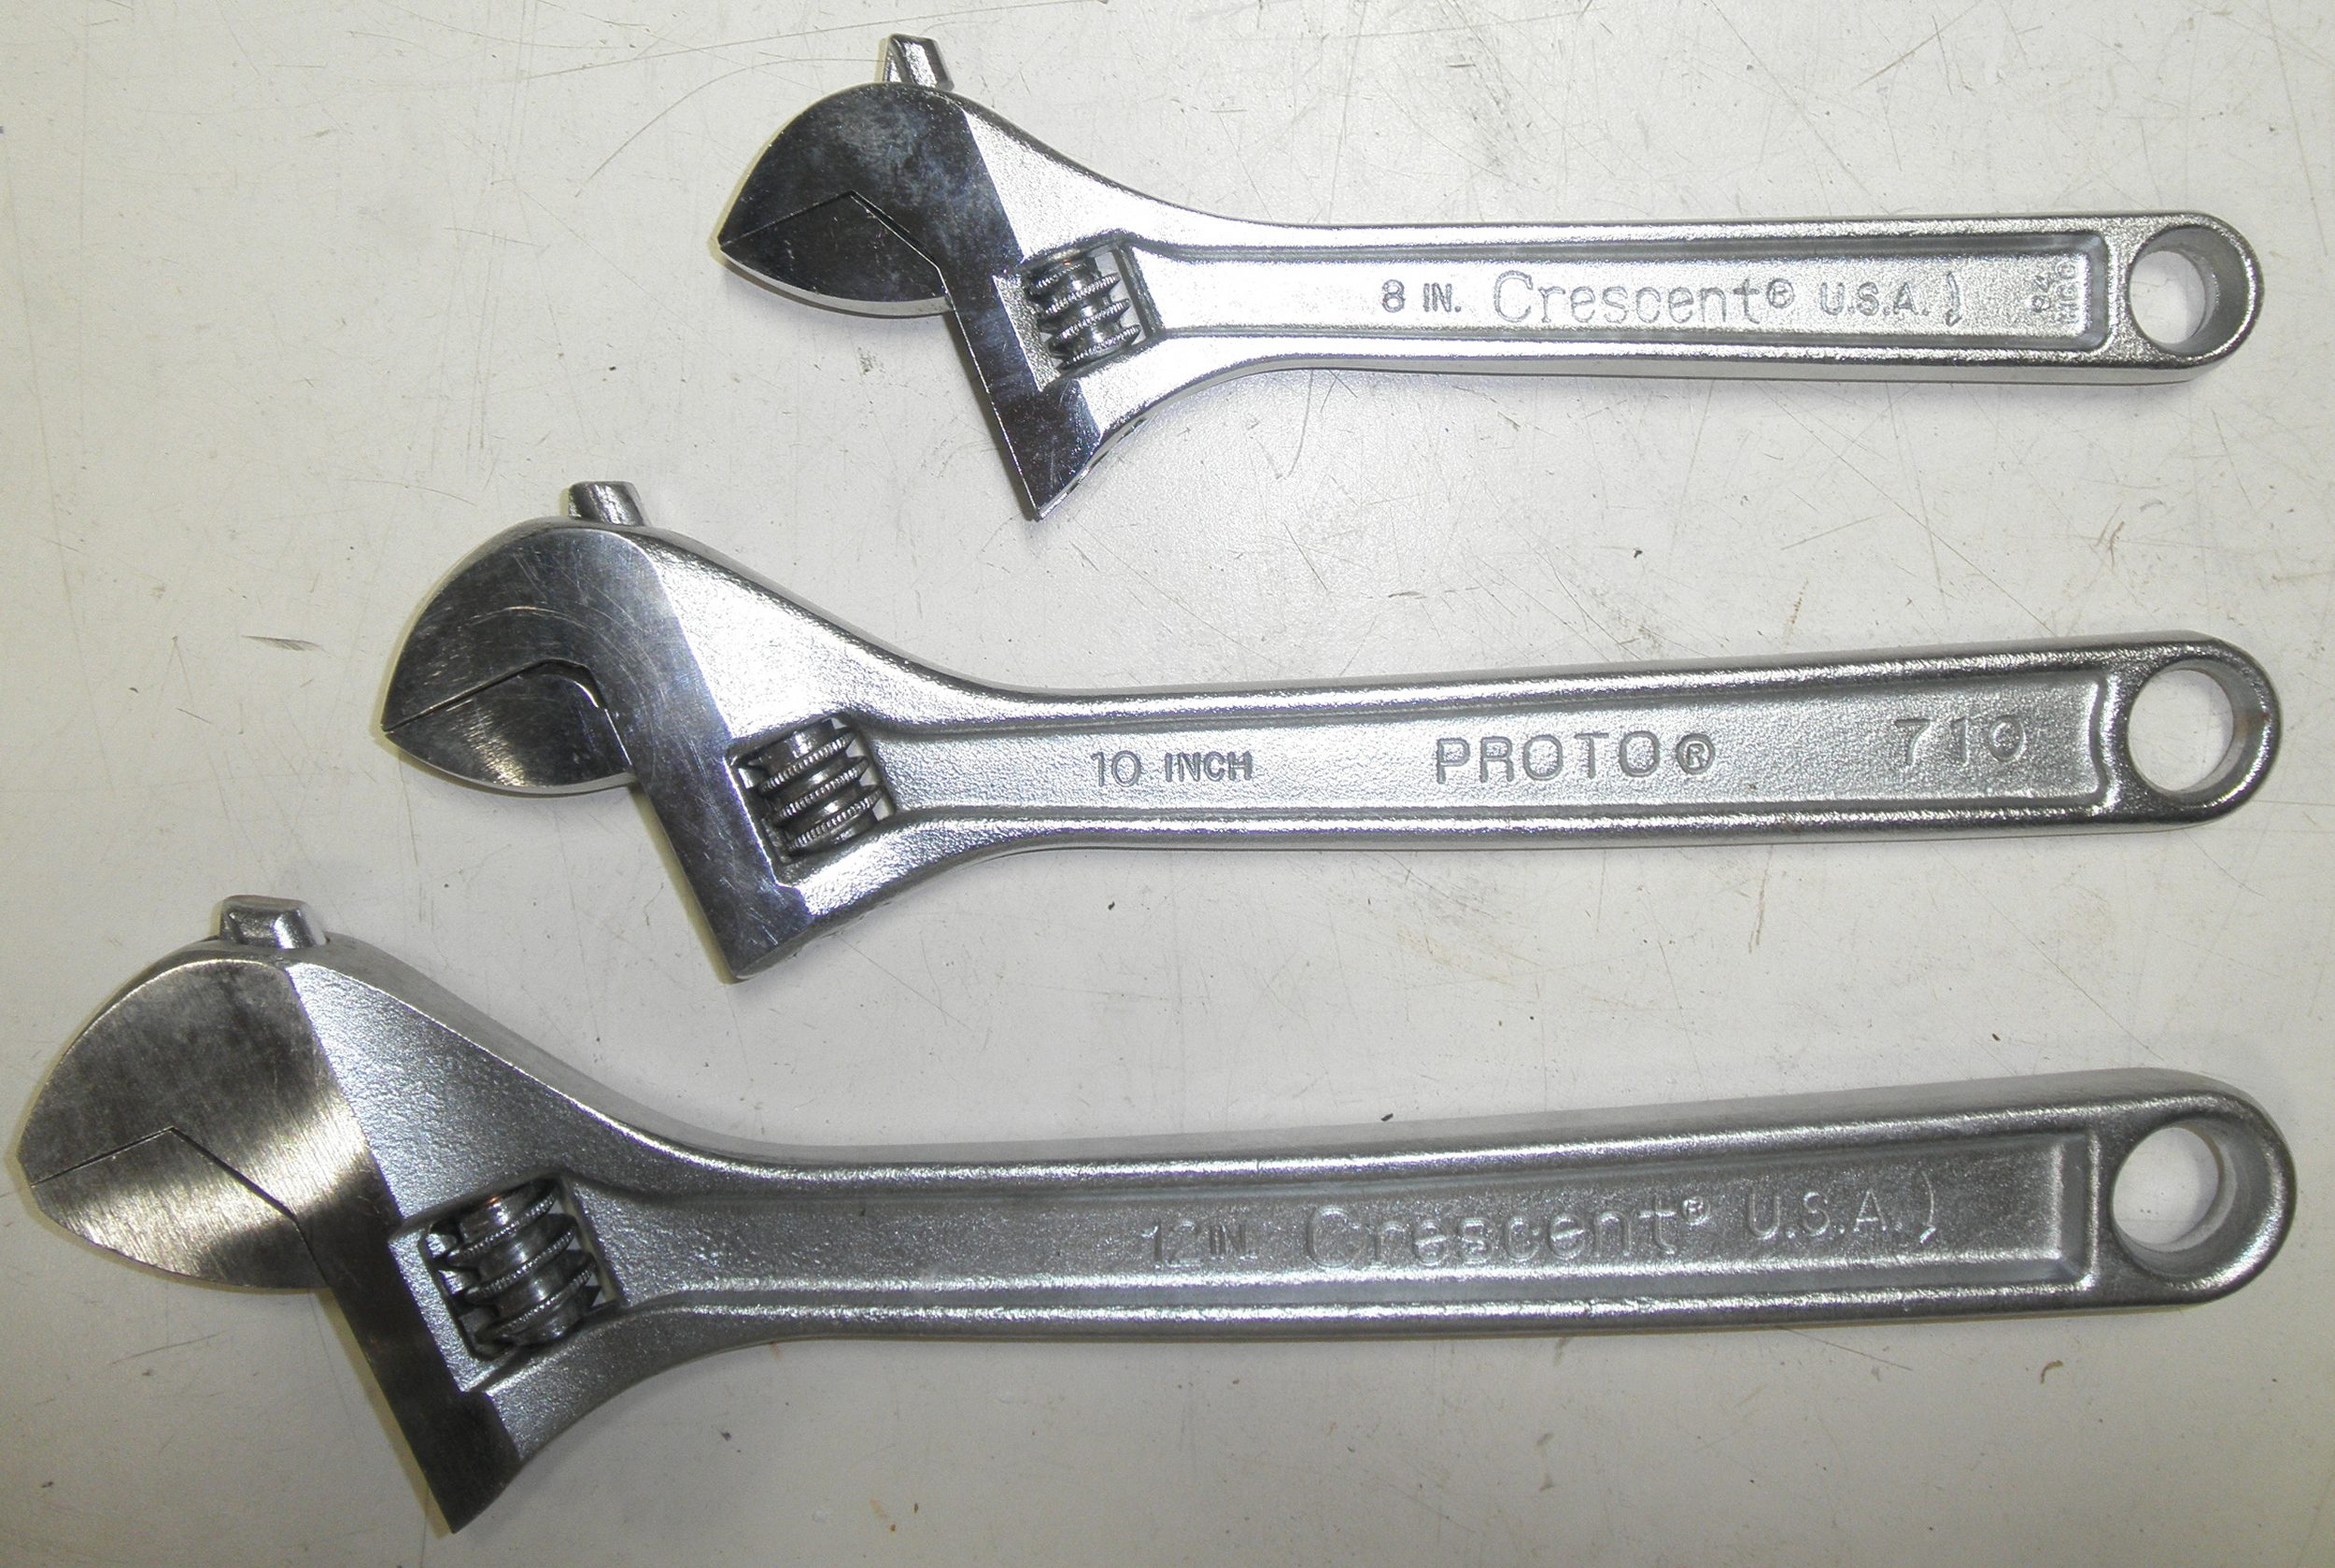 3 Piece Vintage Crescent Adjustable Wrench Set 8" 10" 12" Made in USA Used 